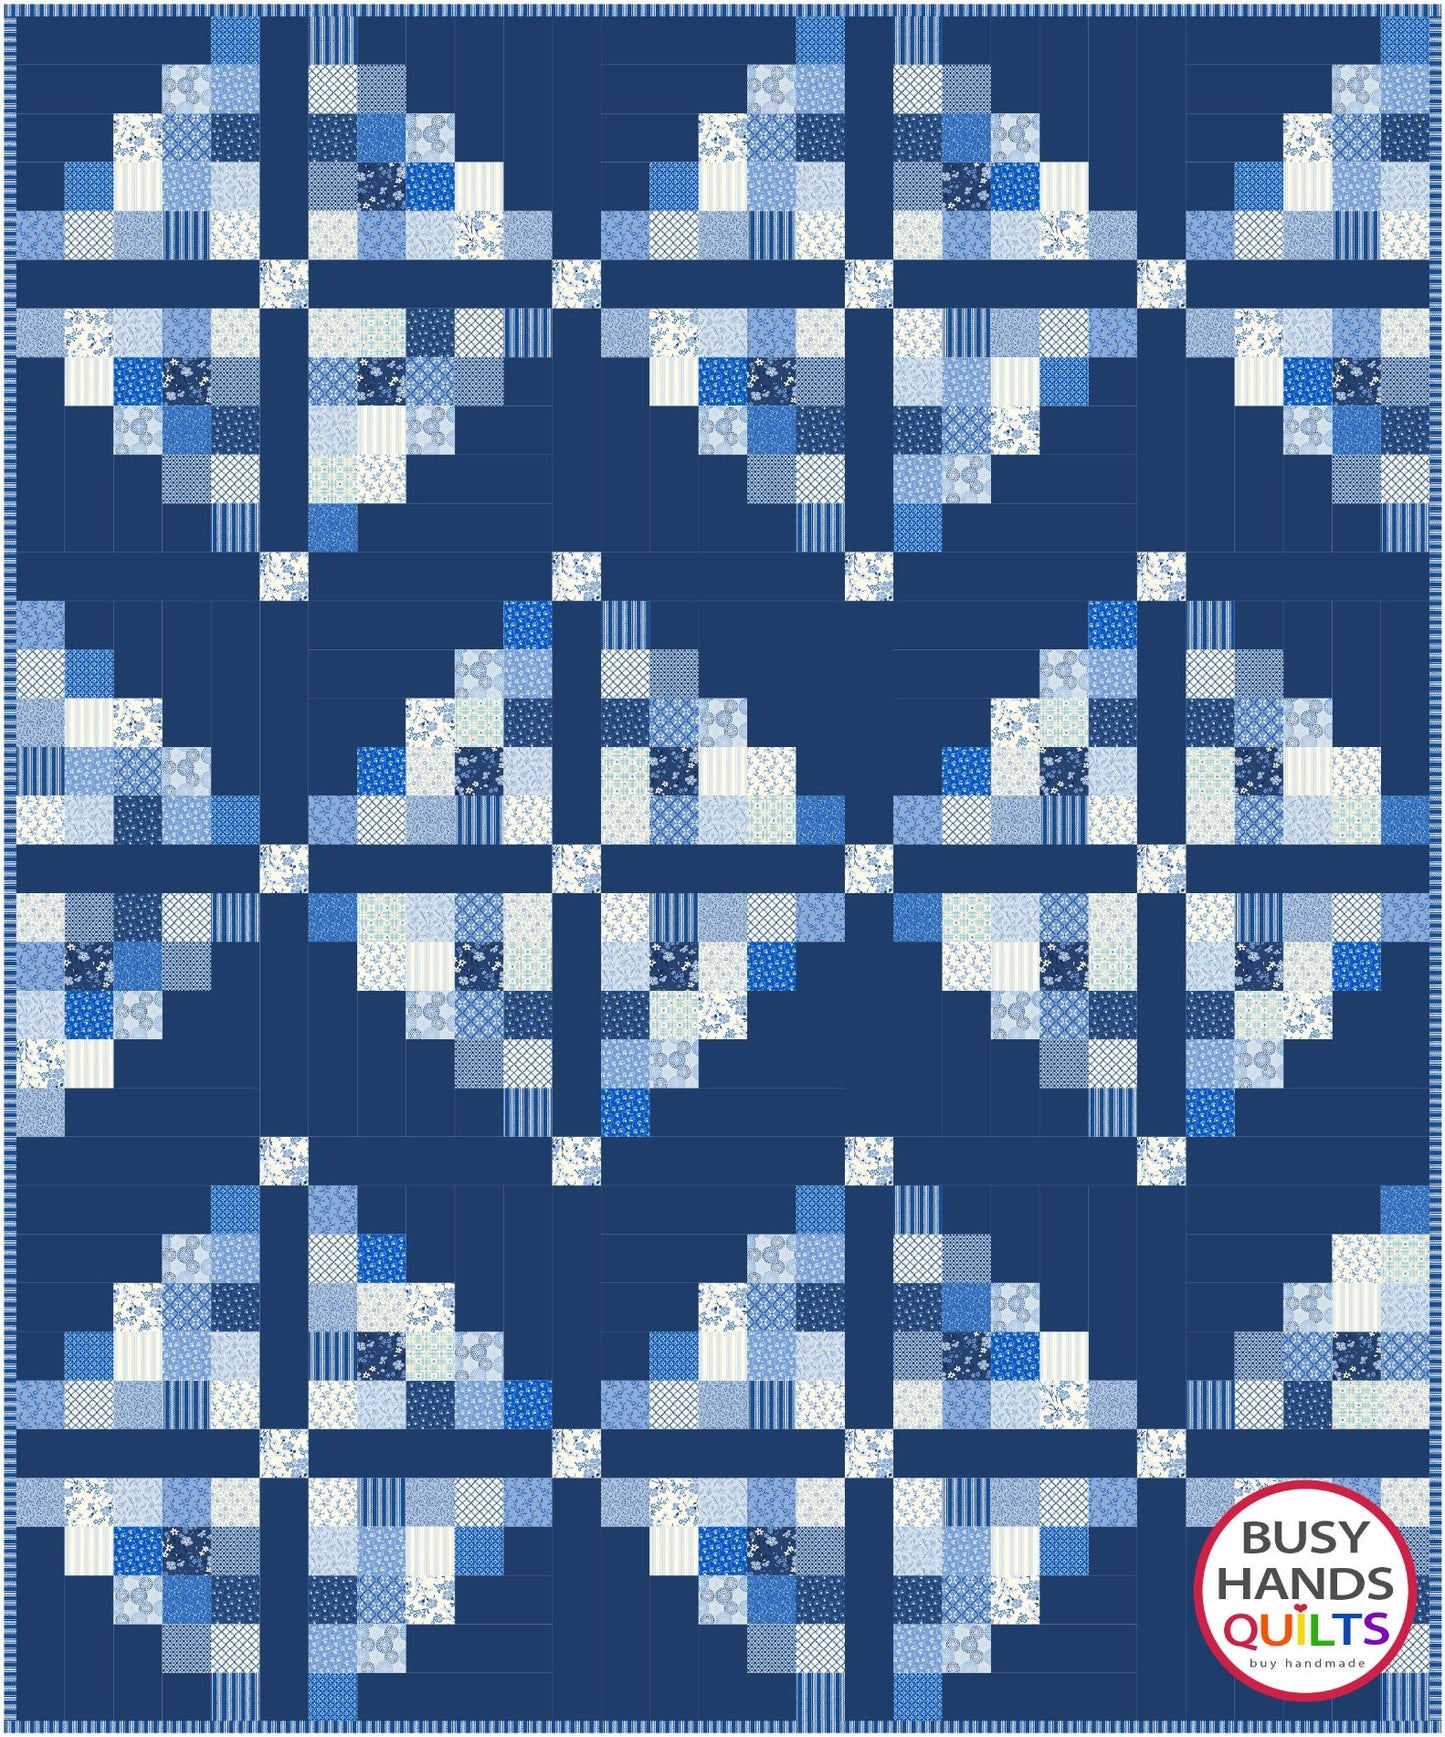 My Farmhouse Quilt Pattern PRINTED